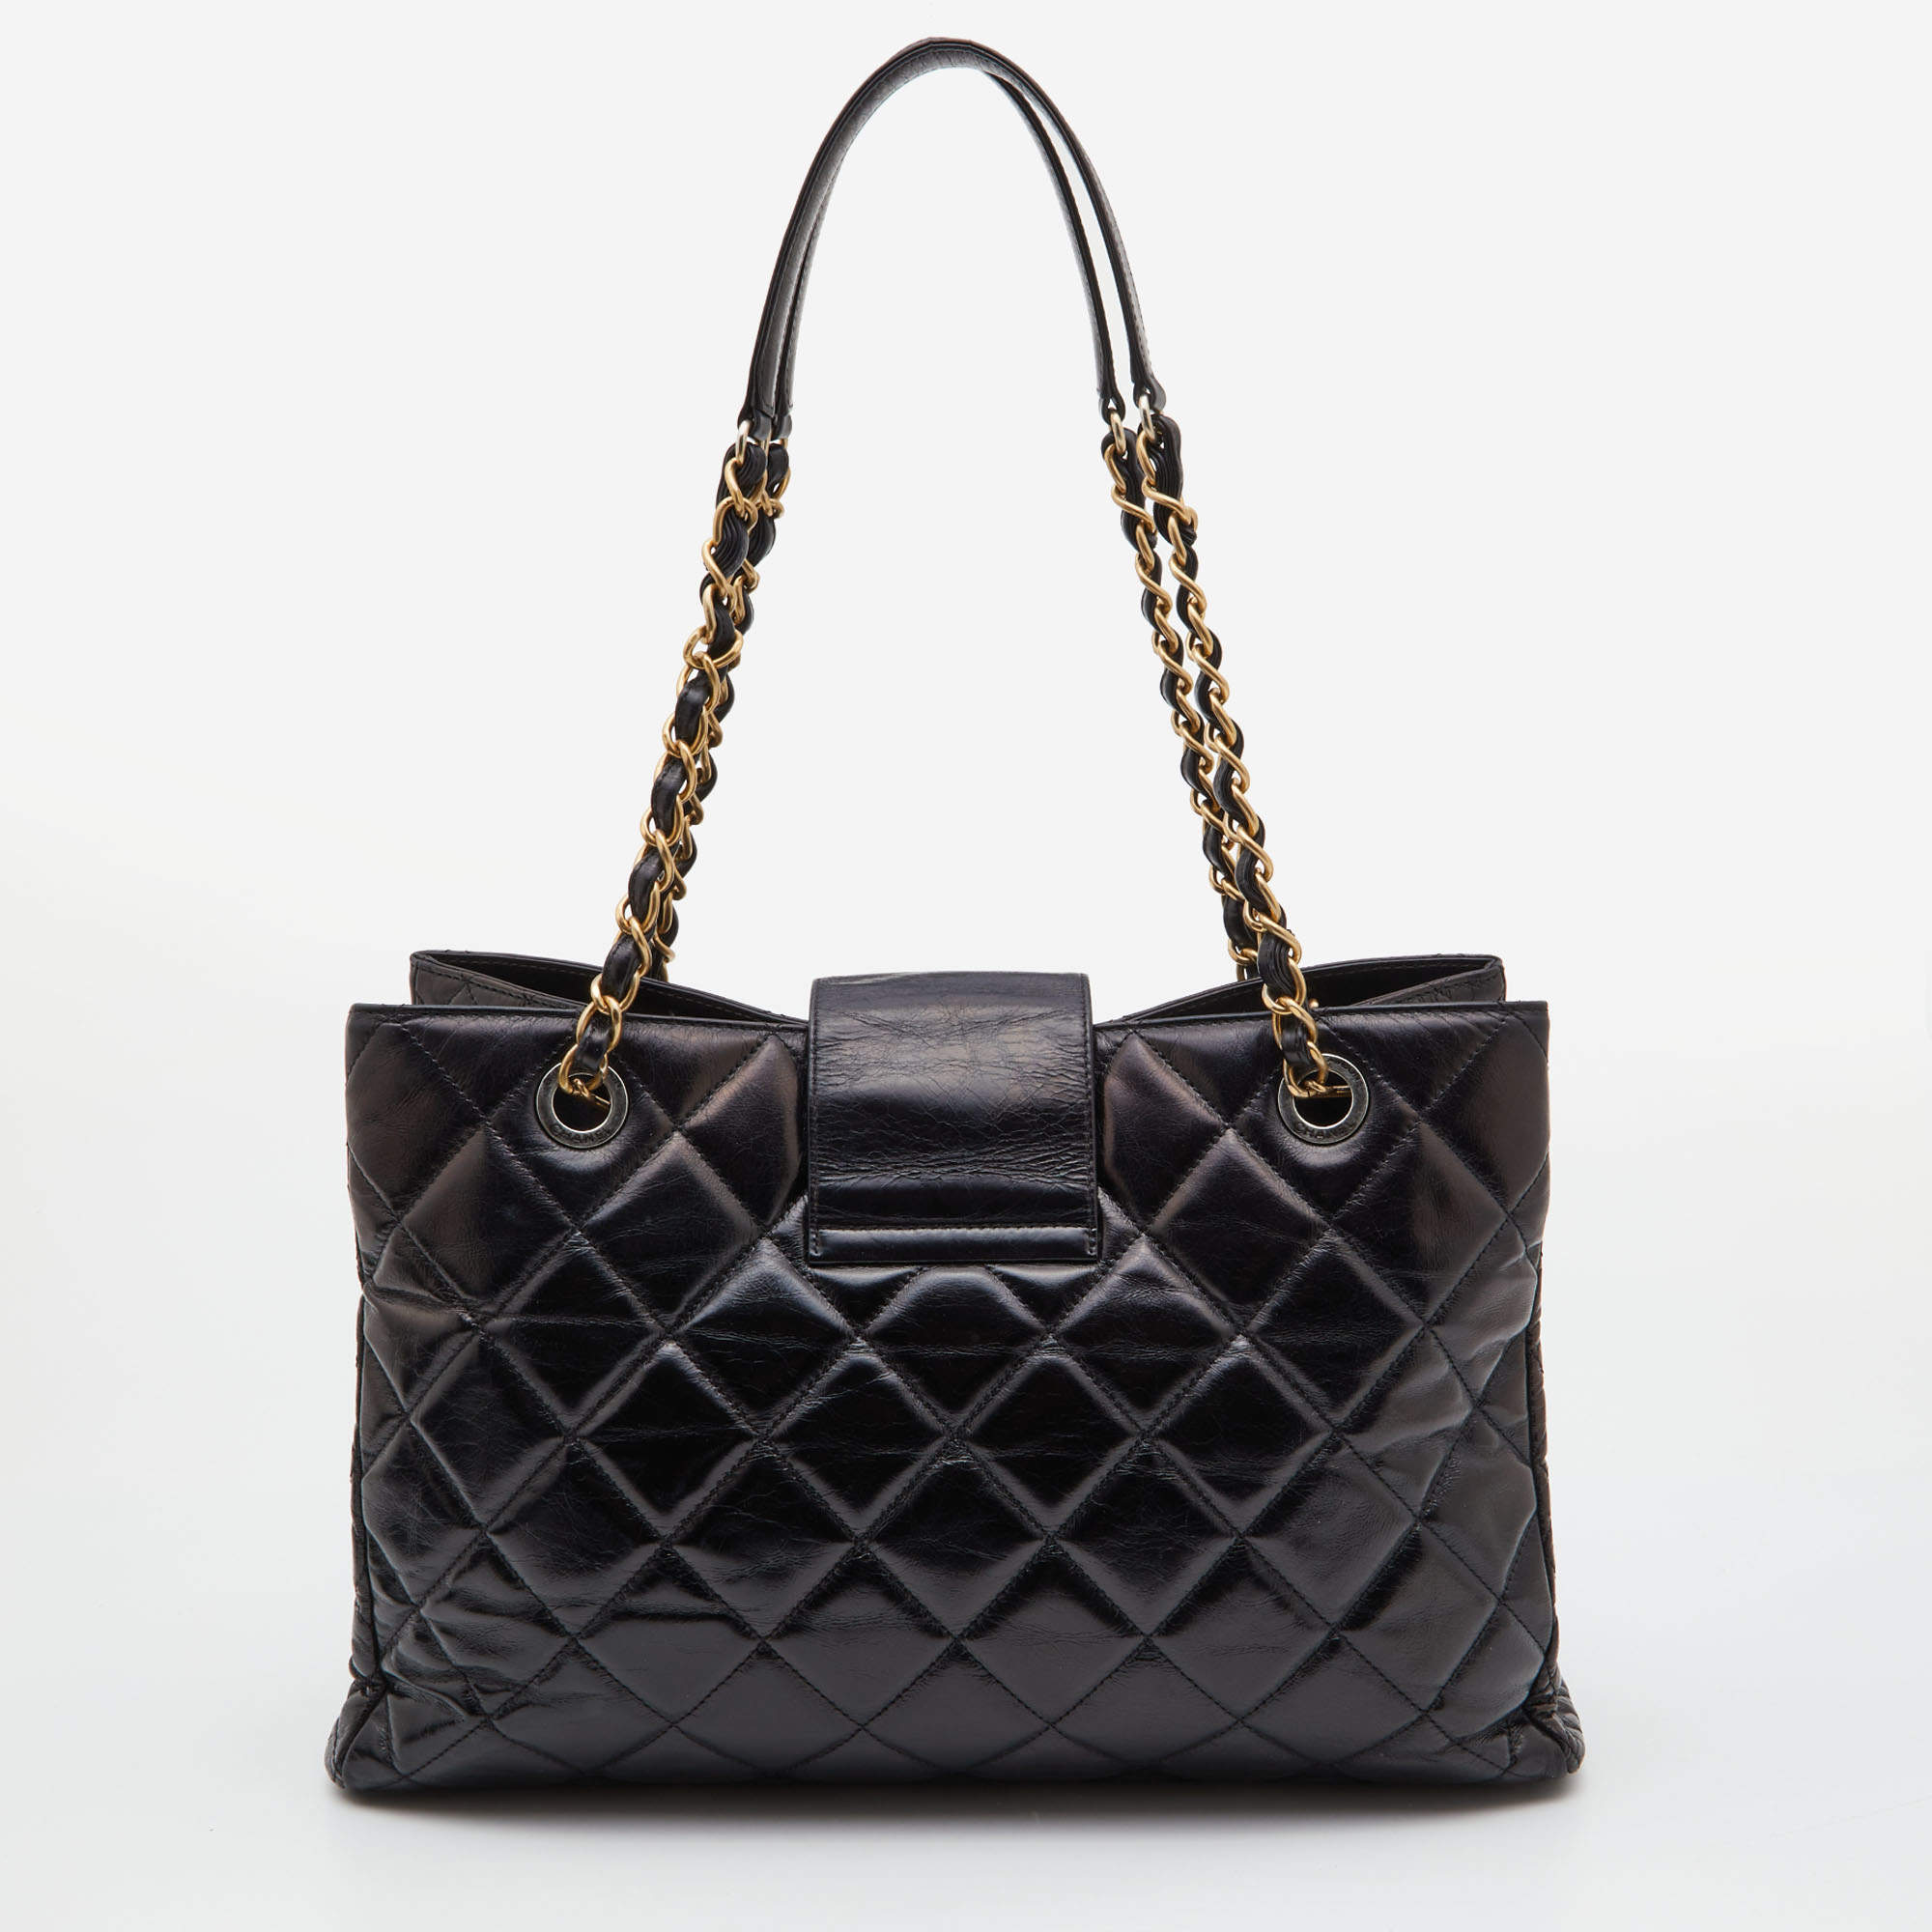 Chanel Black Quilted Aged Leather CC Chain Tote Chanel